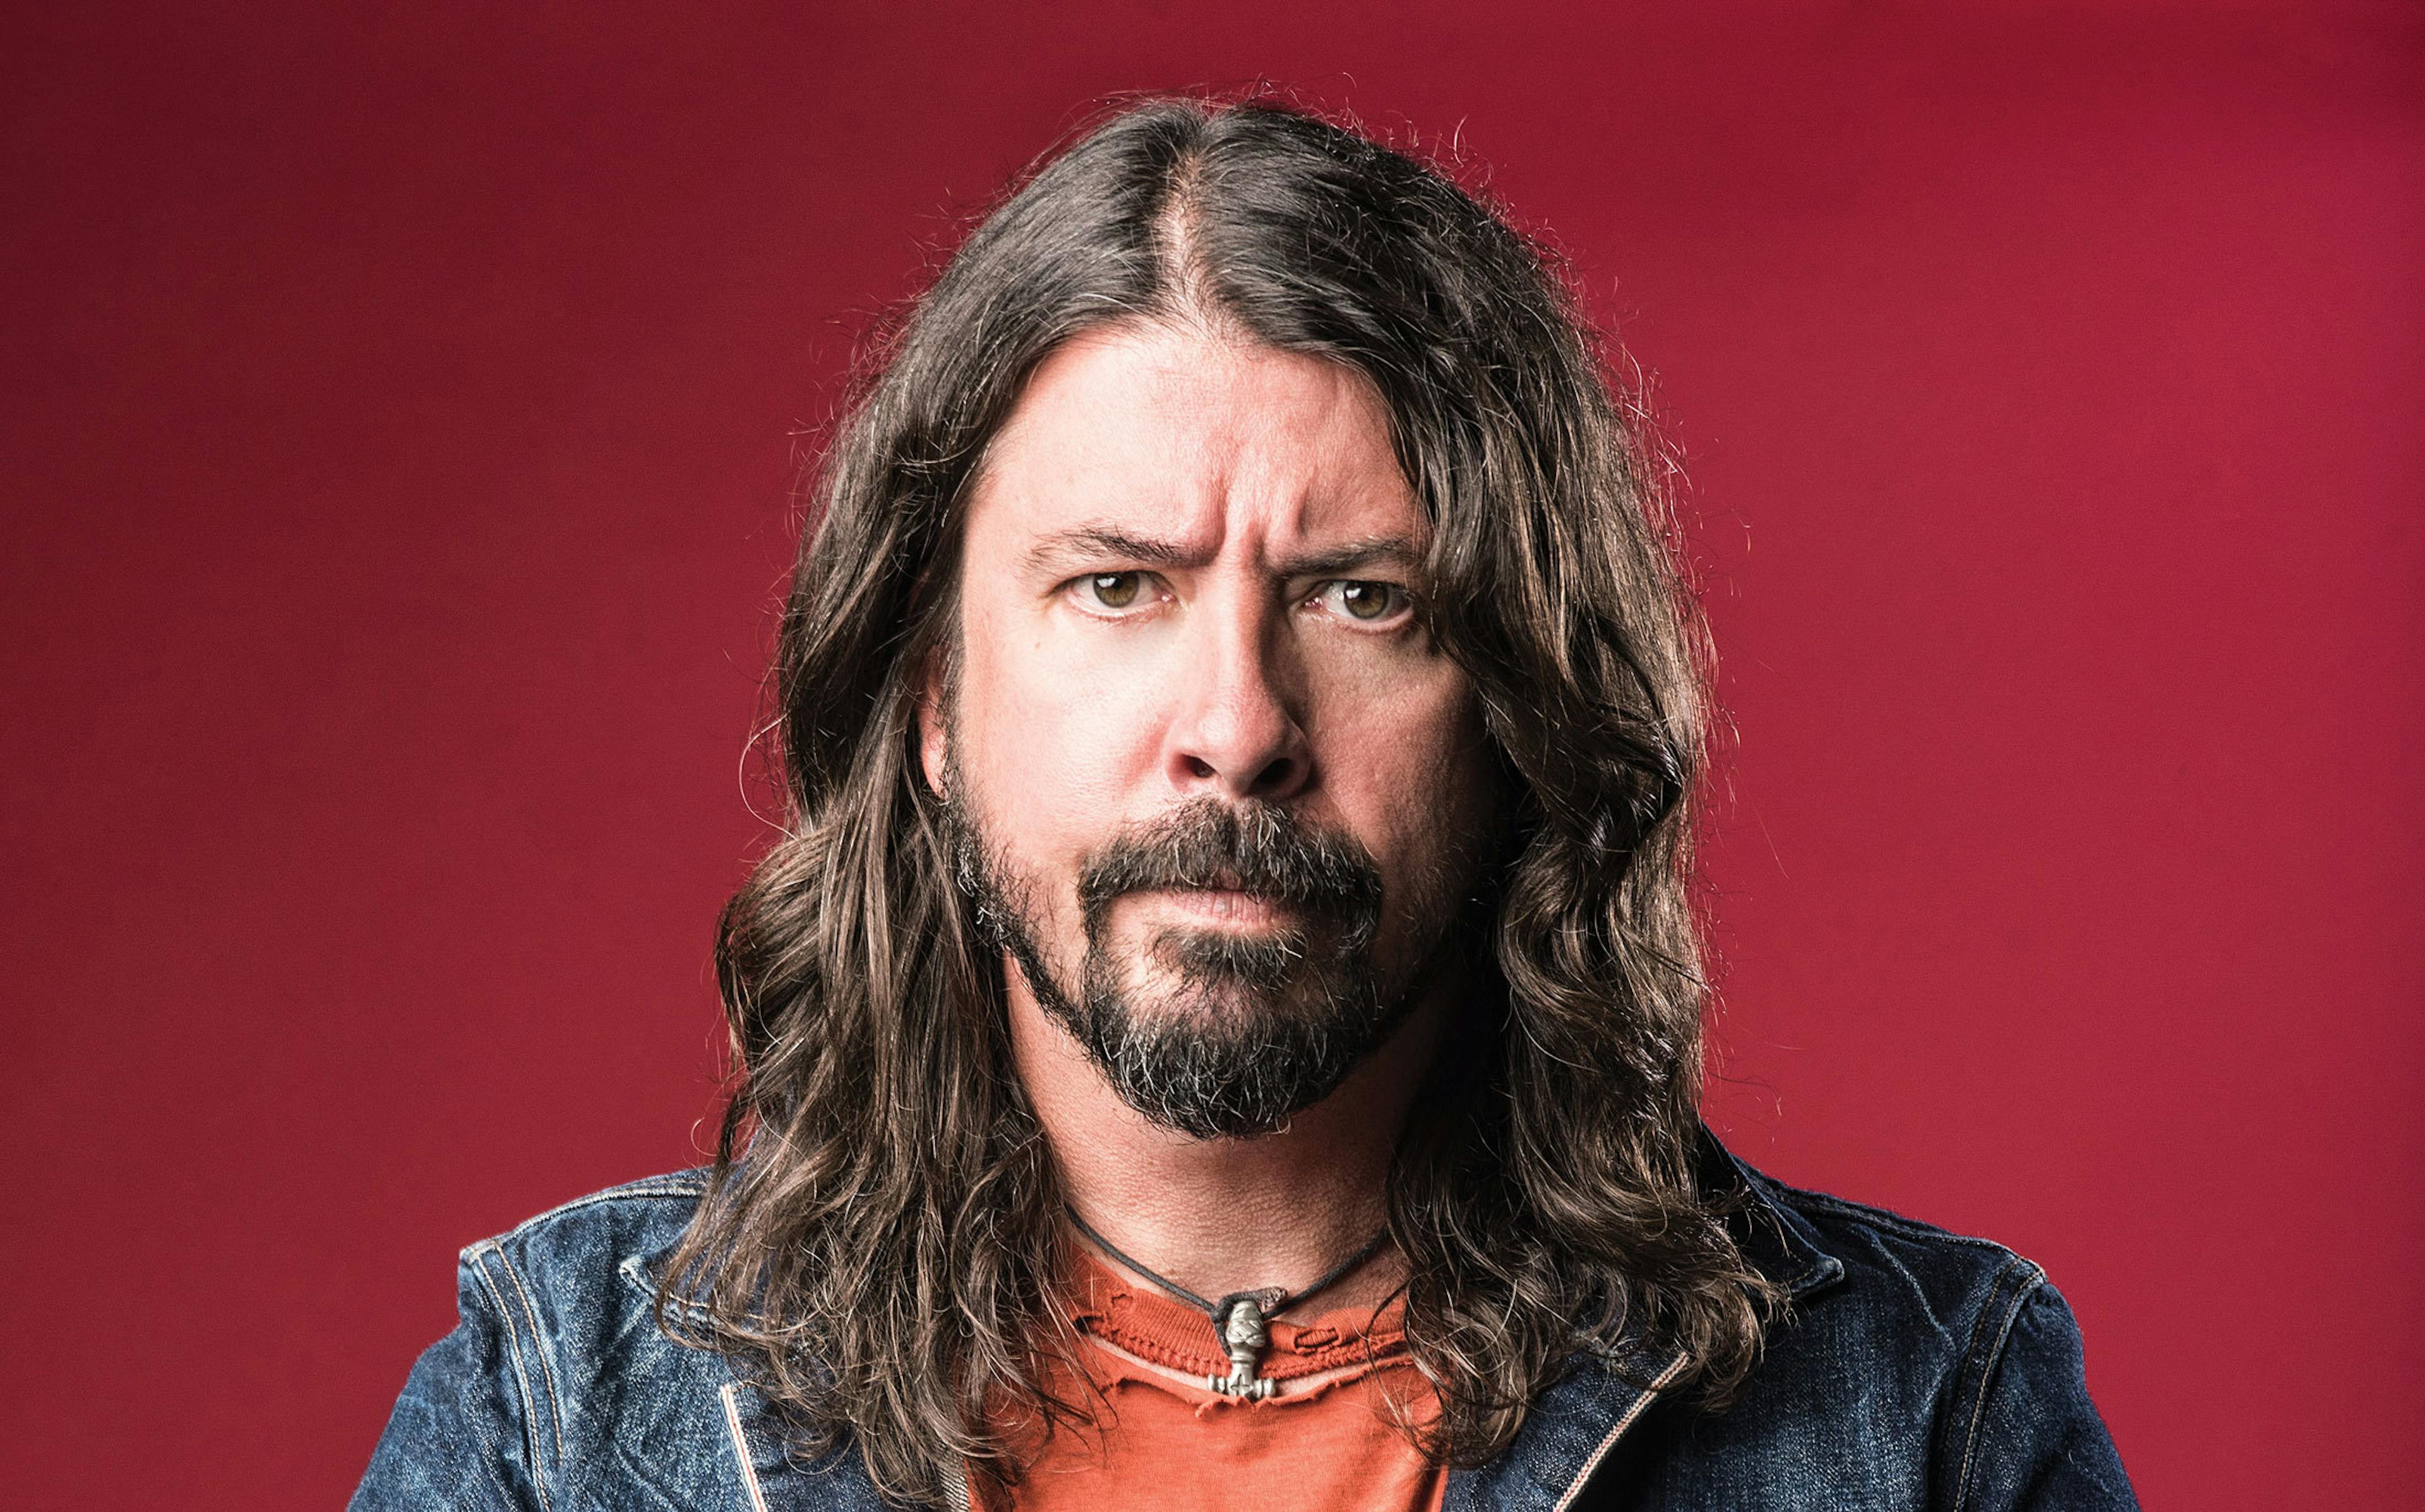 Dave Grohl on that time he took mushrooms at Christmas